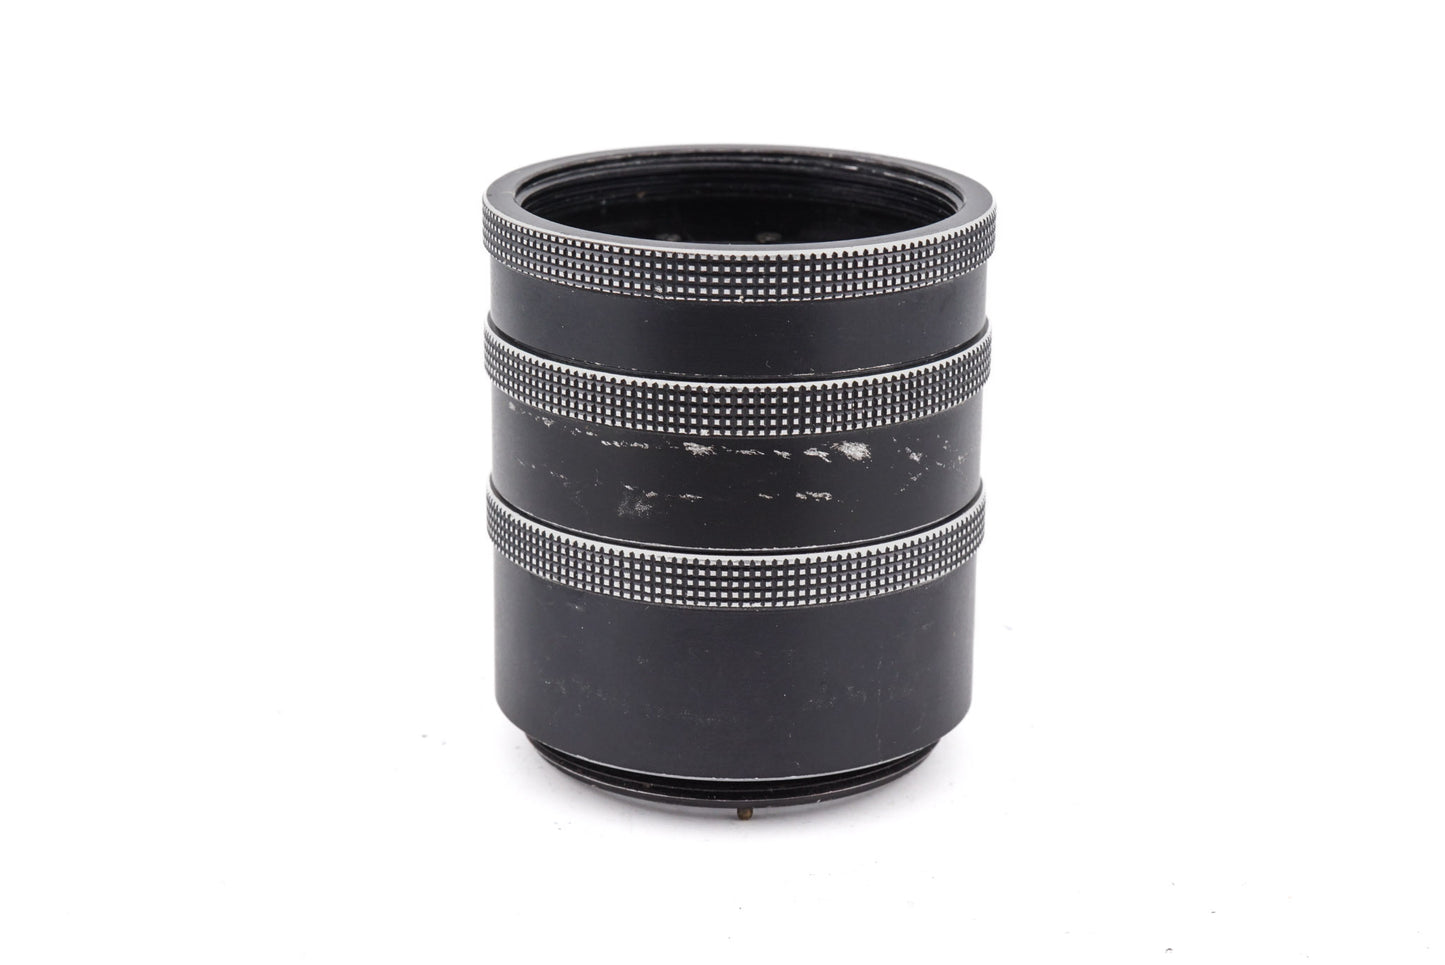 Generic Automatic Extension Tube Set